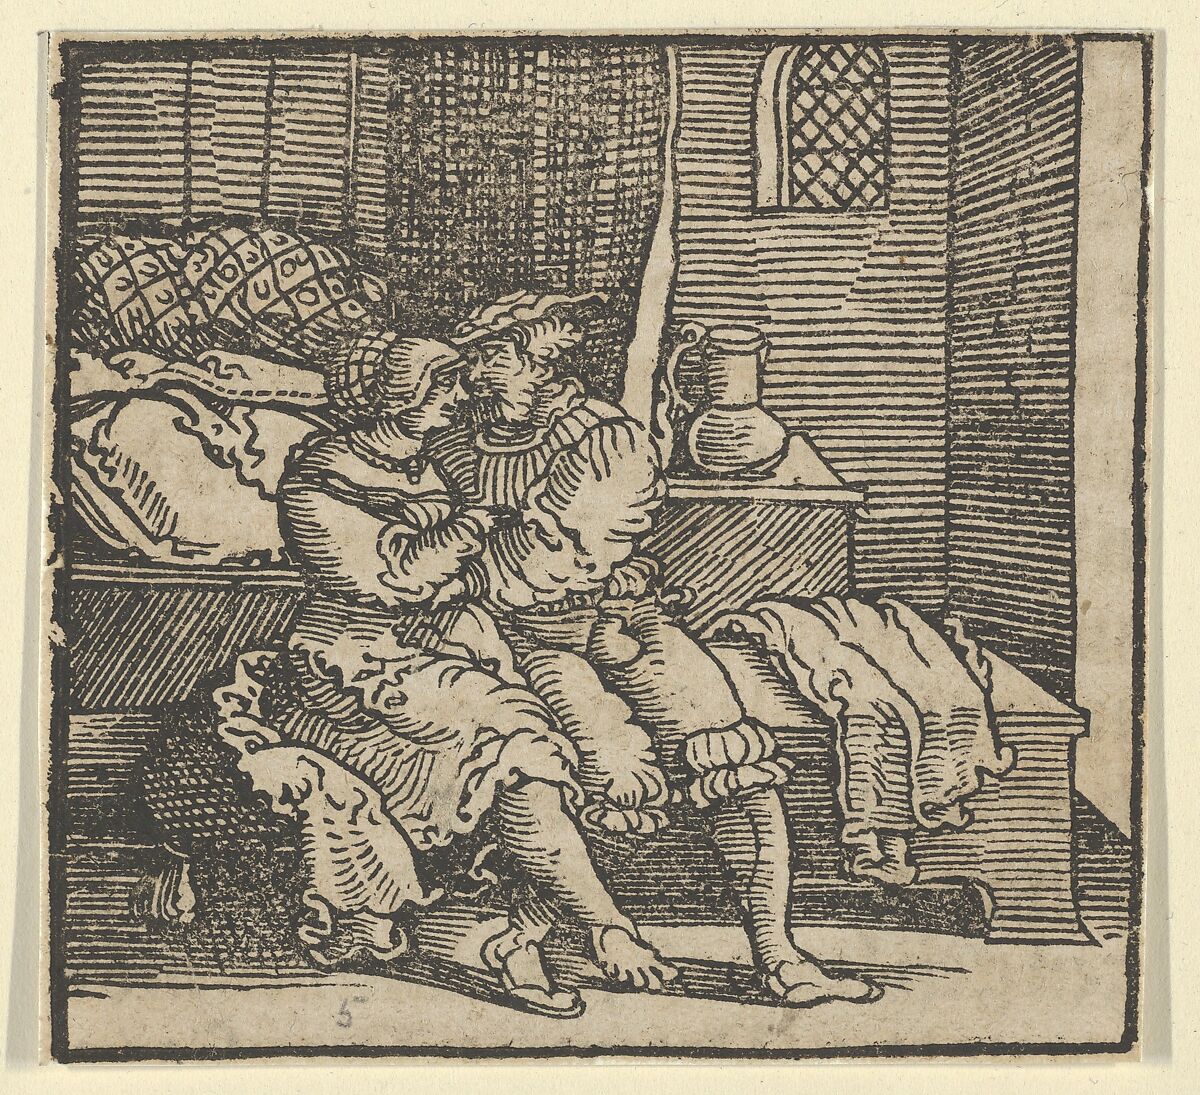 Spinneloccio Locked up in a Chest, on which his Wife and Zeppa are Seated, from The Decameron, Hans Schäufelein (German, Nuremberg ca. 1480–ca. 1540 Nördlingen), Woodcut 